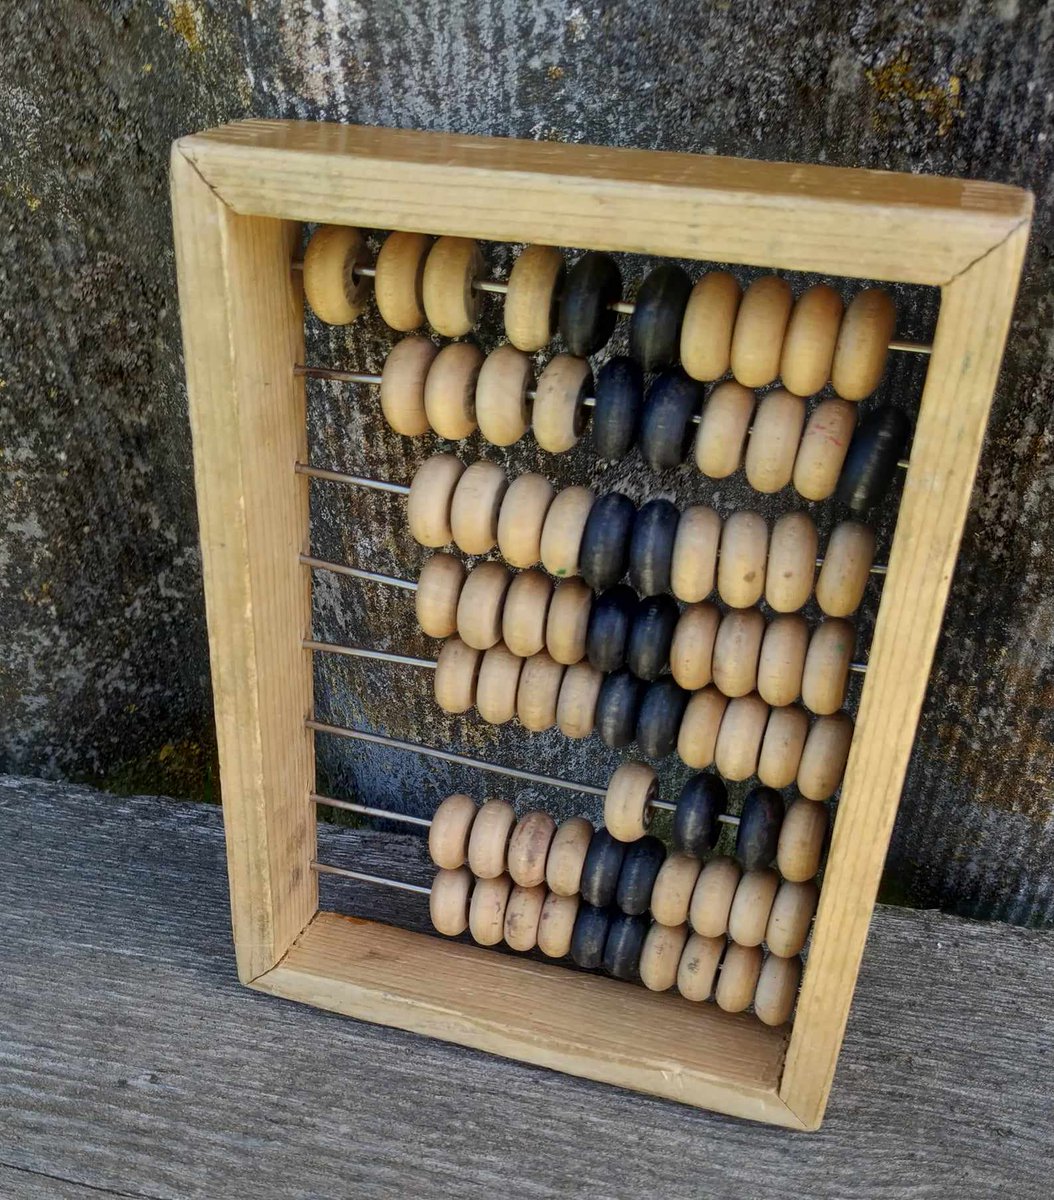 #Sale! 25% OFF!

#Wooden #Abacus #Vintage #Soviet #Industrial #OldTime #Computer #Rustic #Wooden #Calculator #Steampunk #OfficeDecor 

etsy.me/4a4gzly